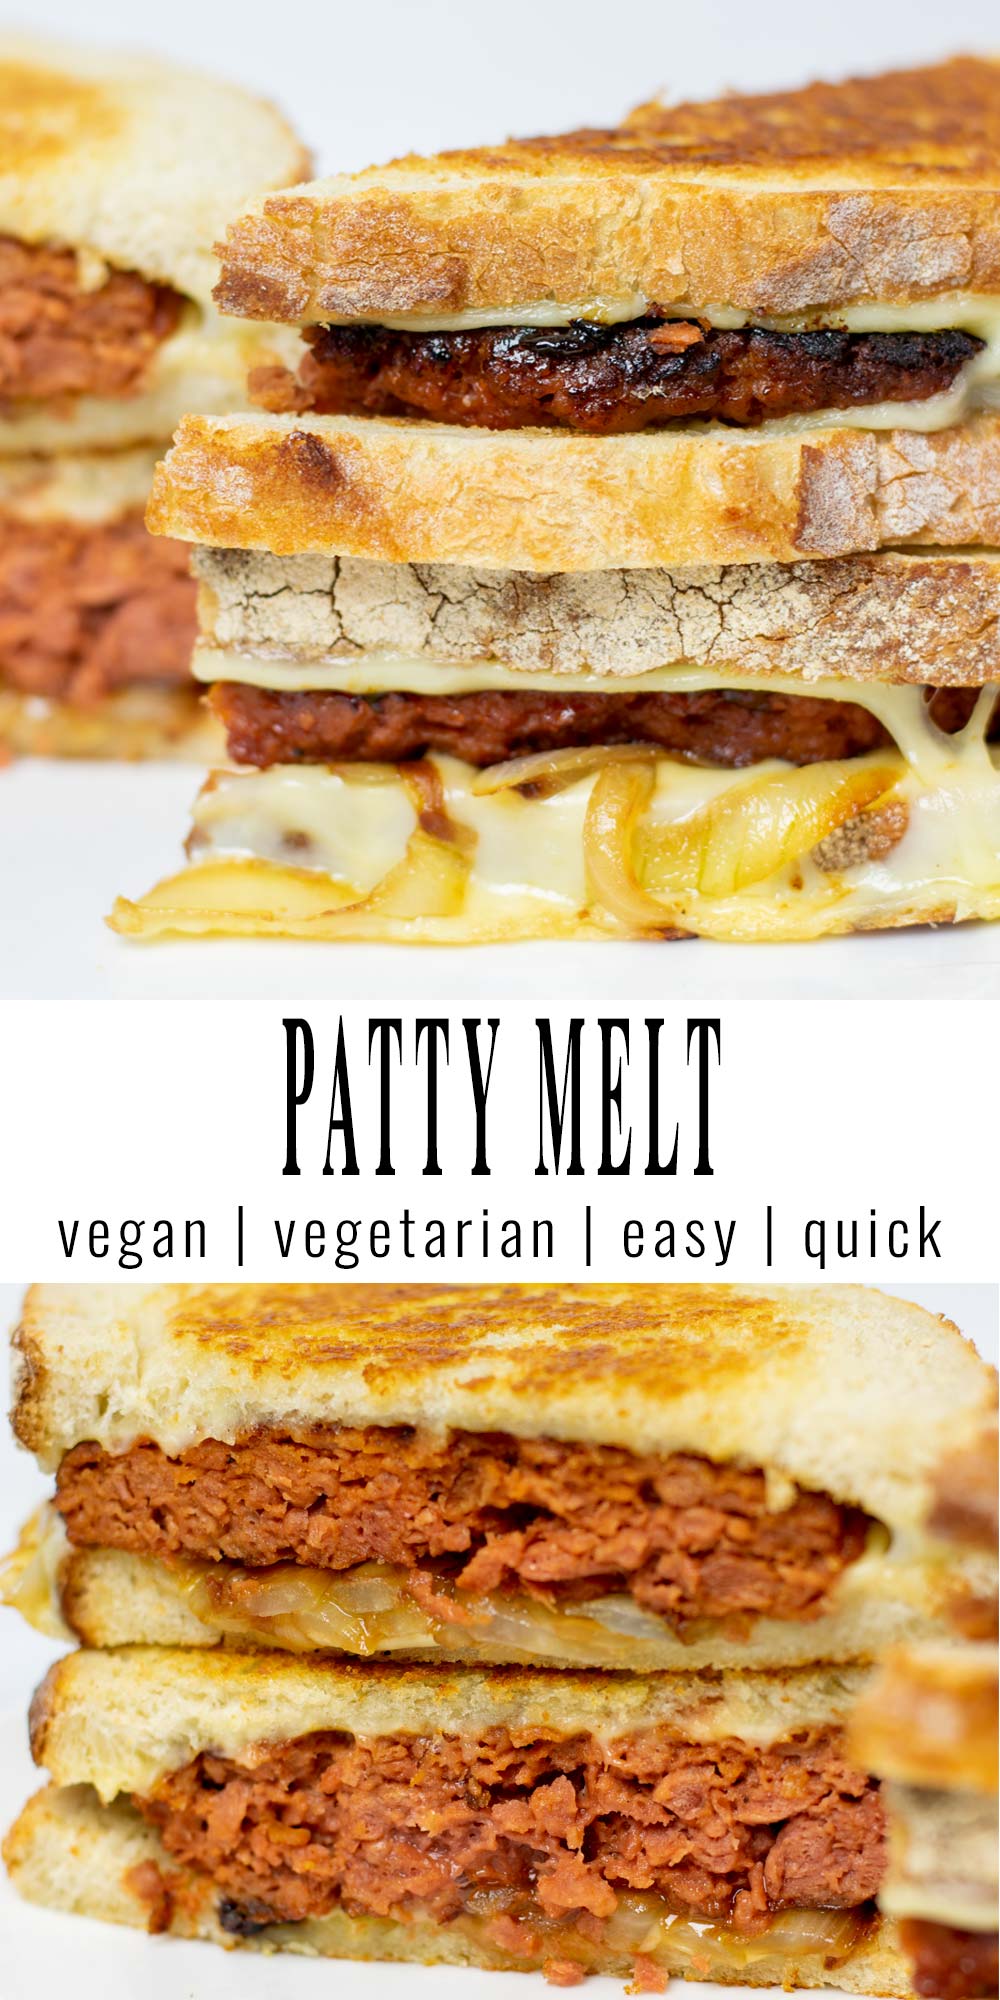 Collage of two pictures of the Patty Melt with recipe title text.